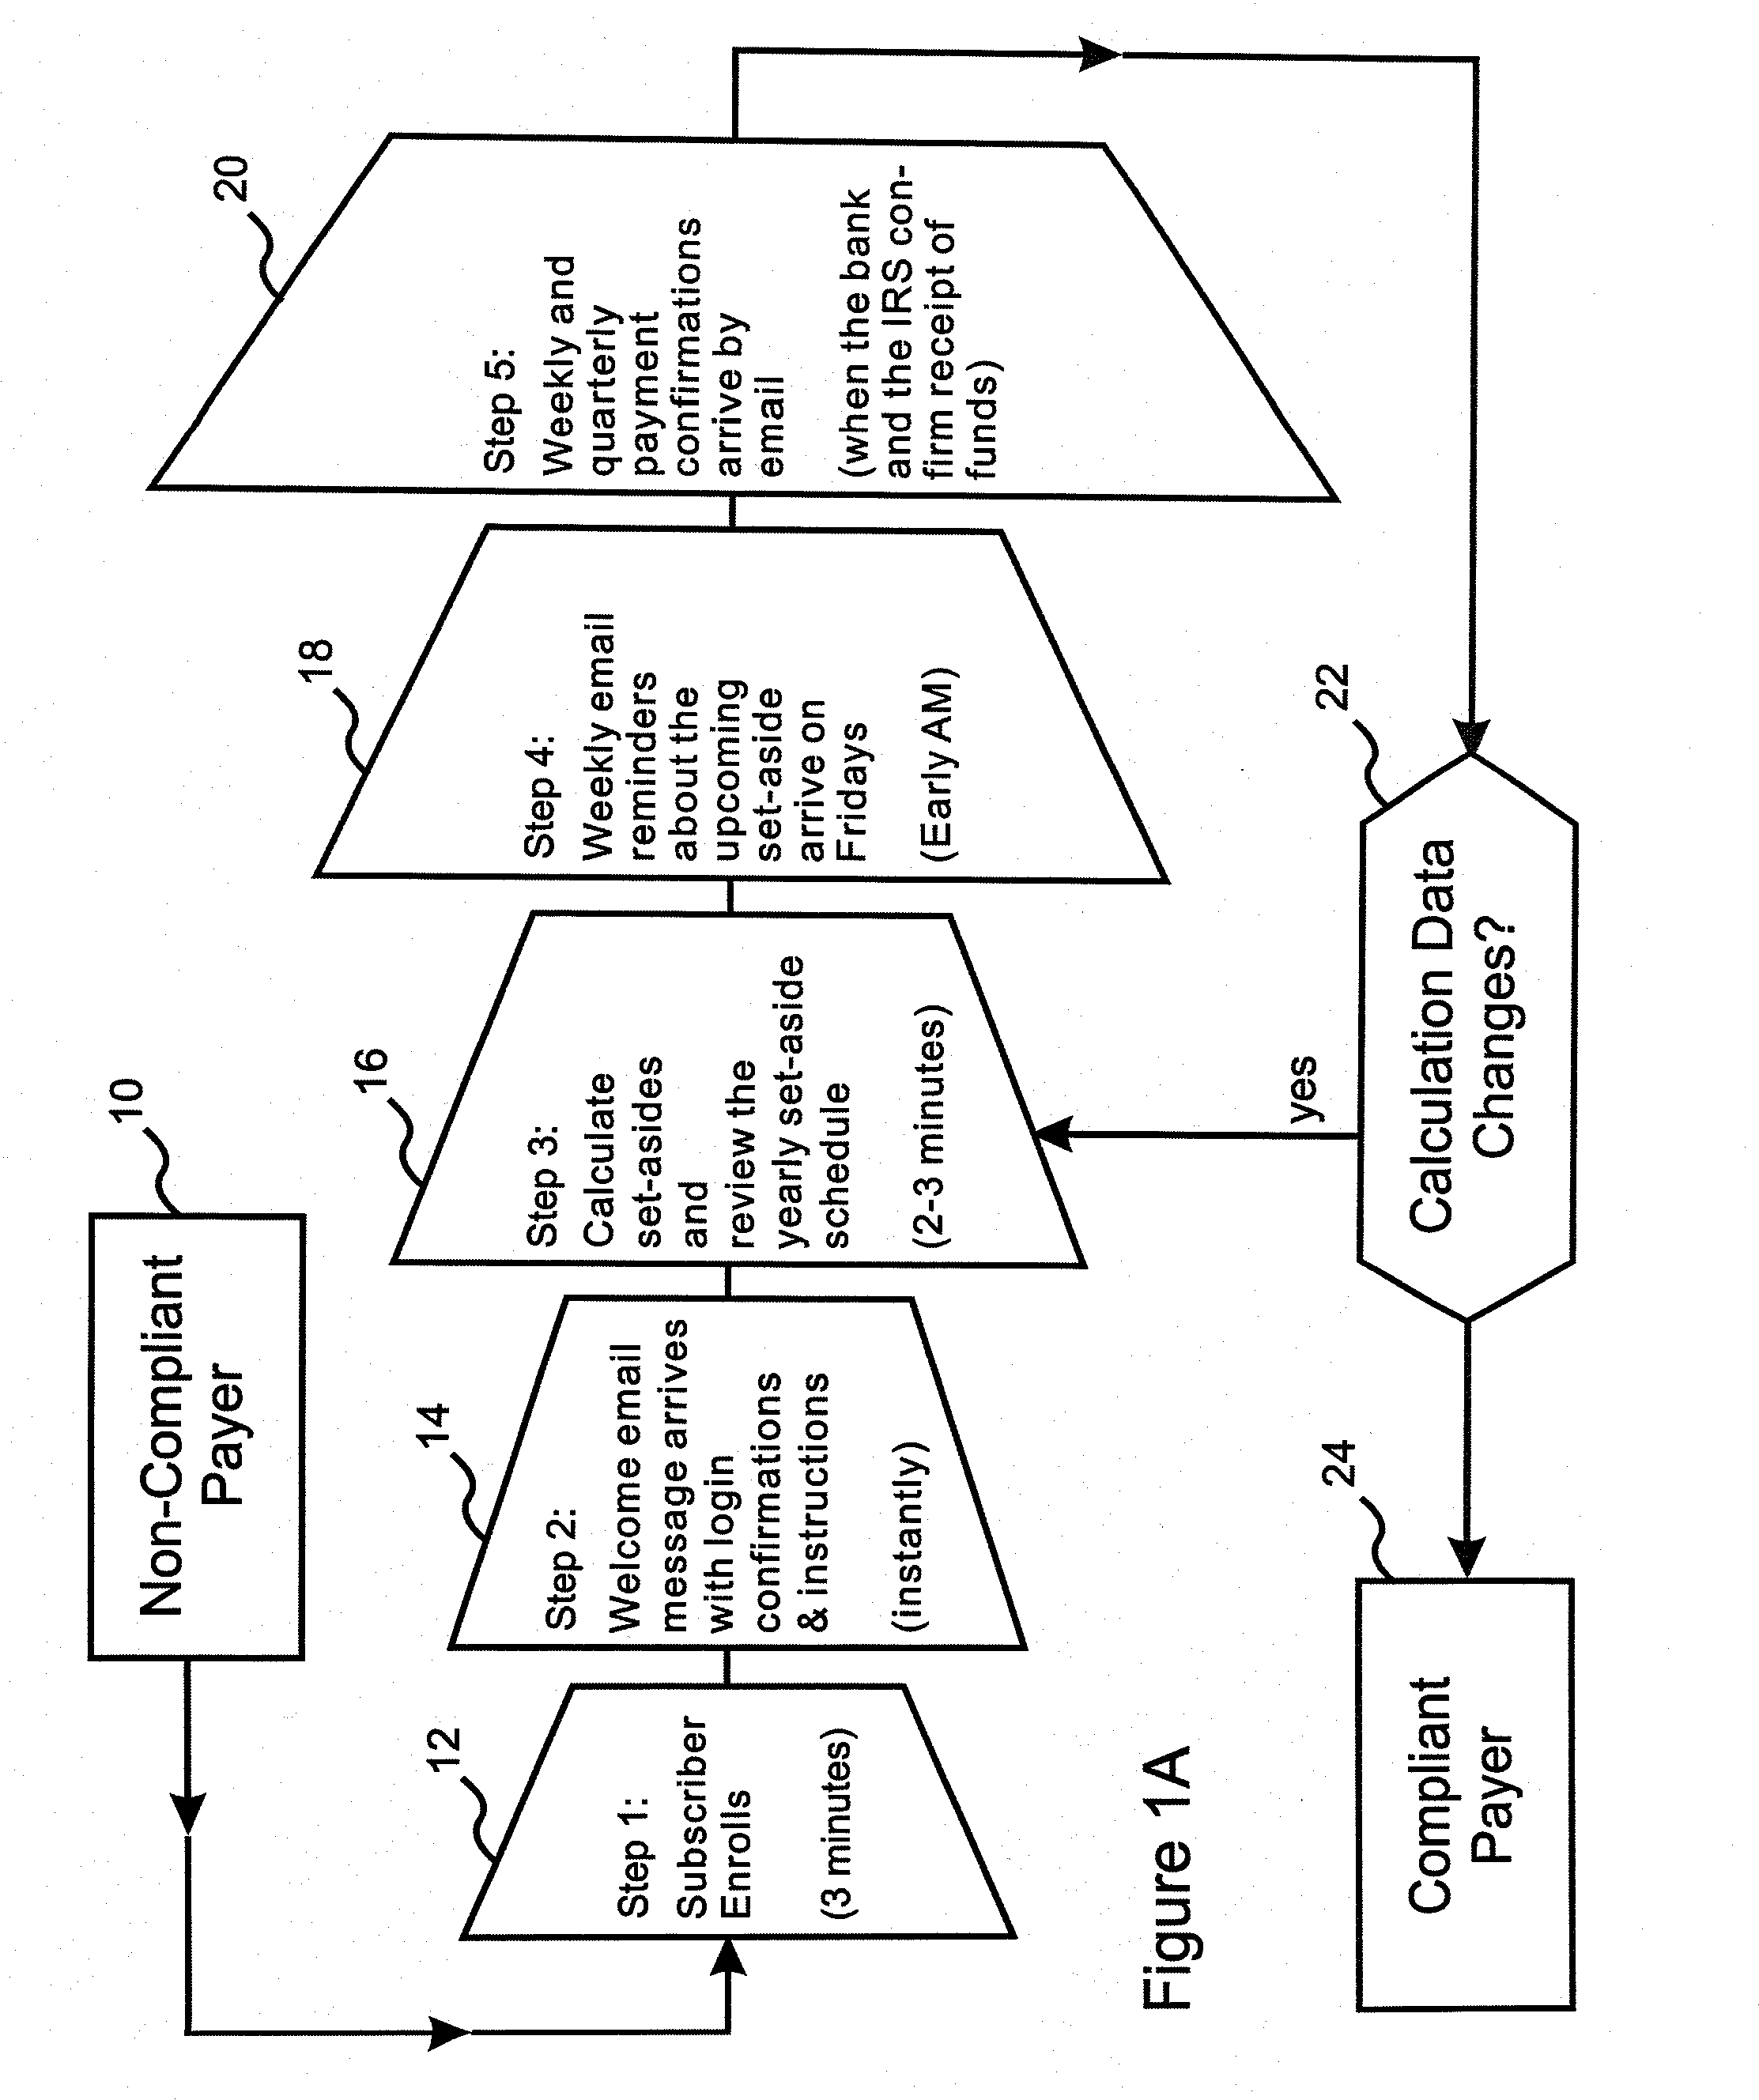 Flexible and adaptive accrual method and apparatus for calculating and facilitating compliance with taxes and other obligations